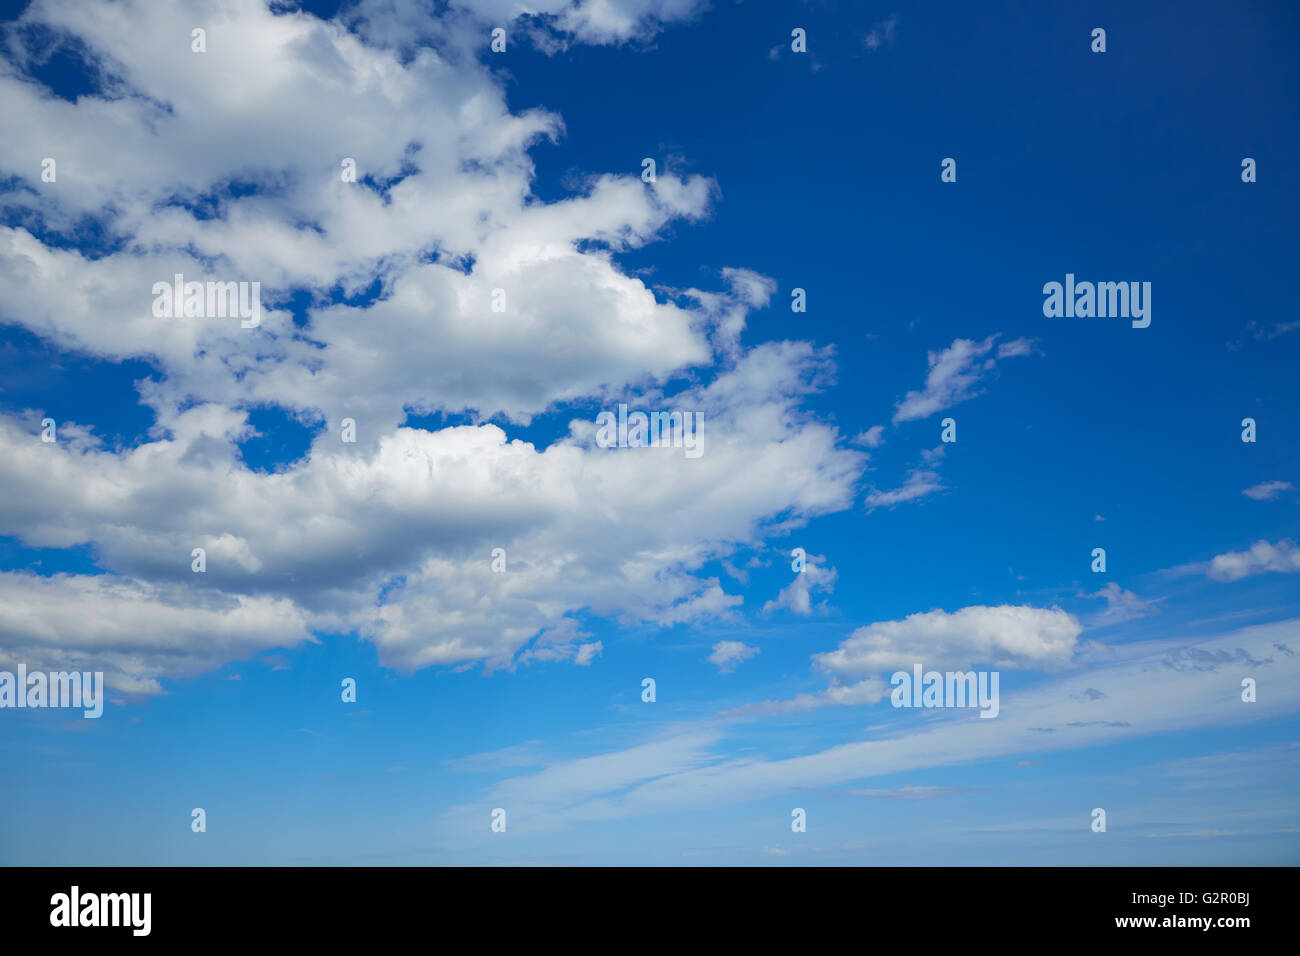 Blue summer sky in Mediterranean sea with white clouds Stock Photo